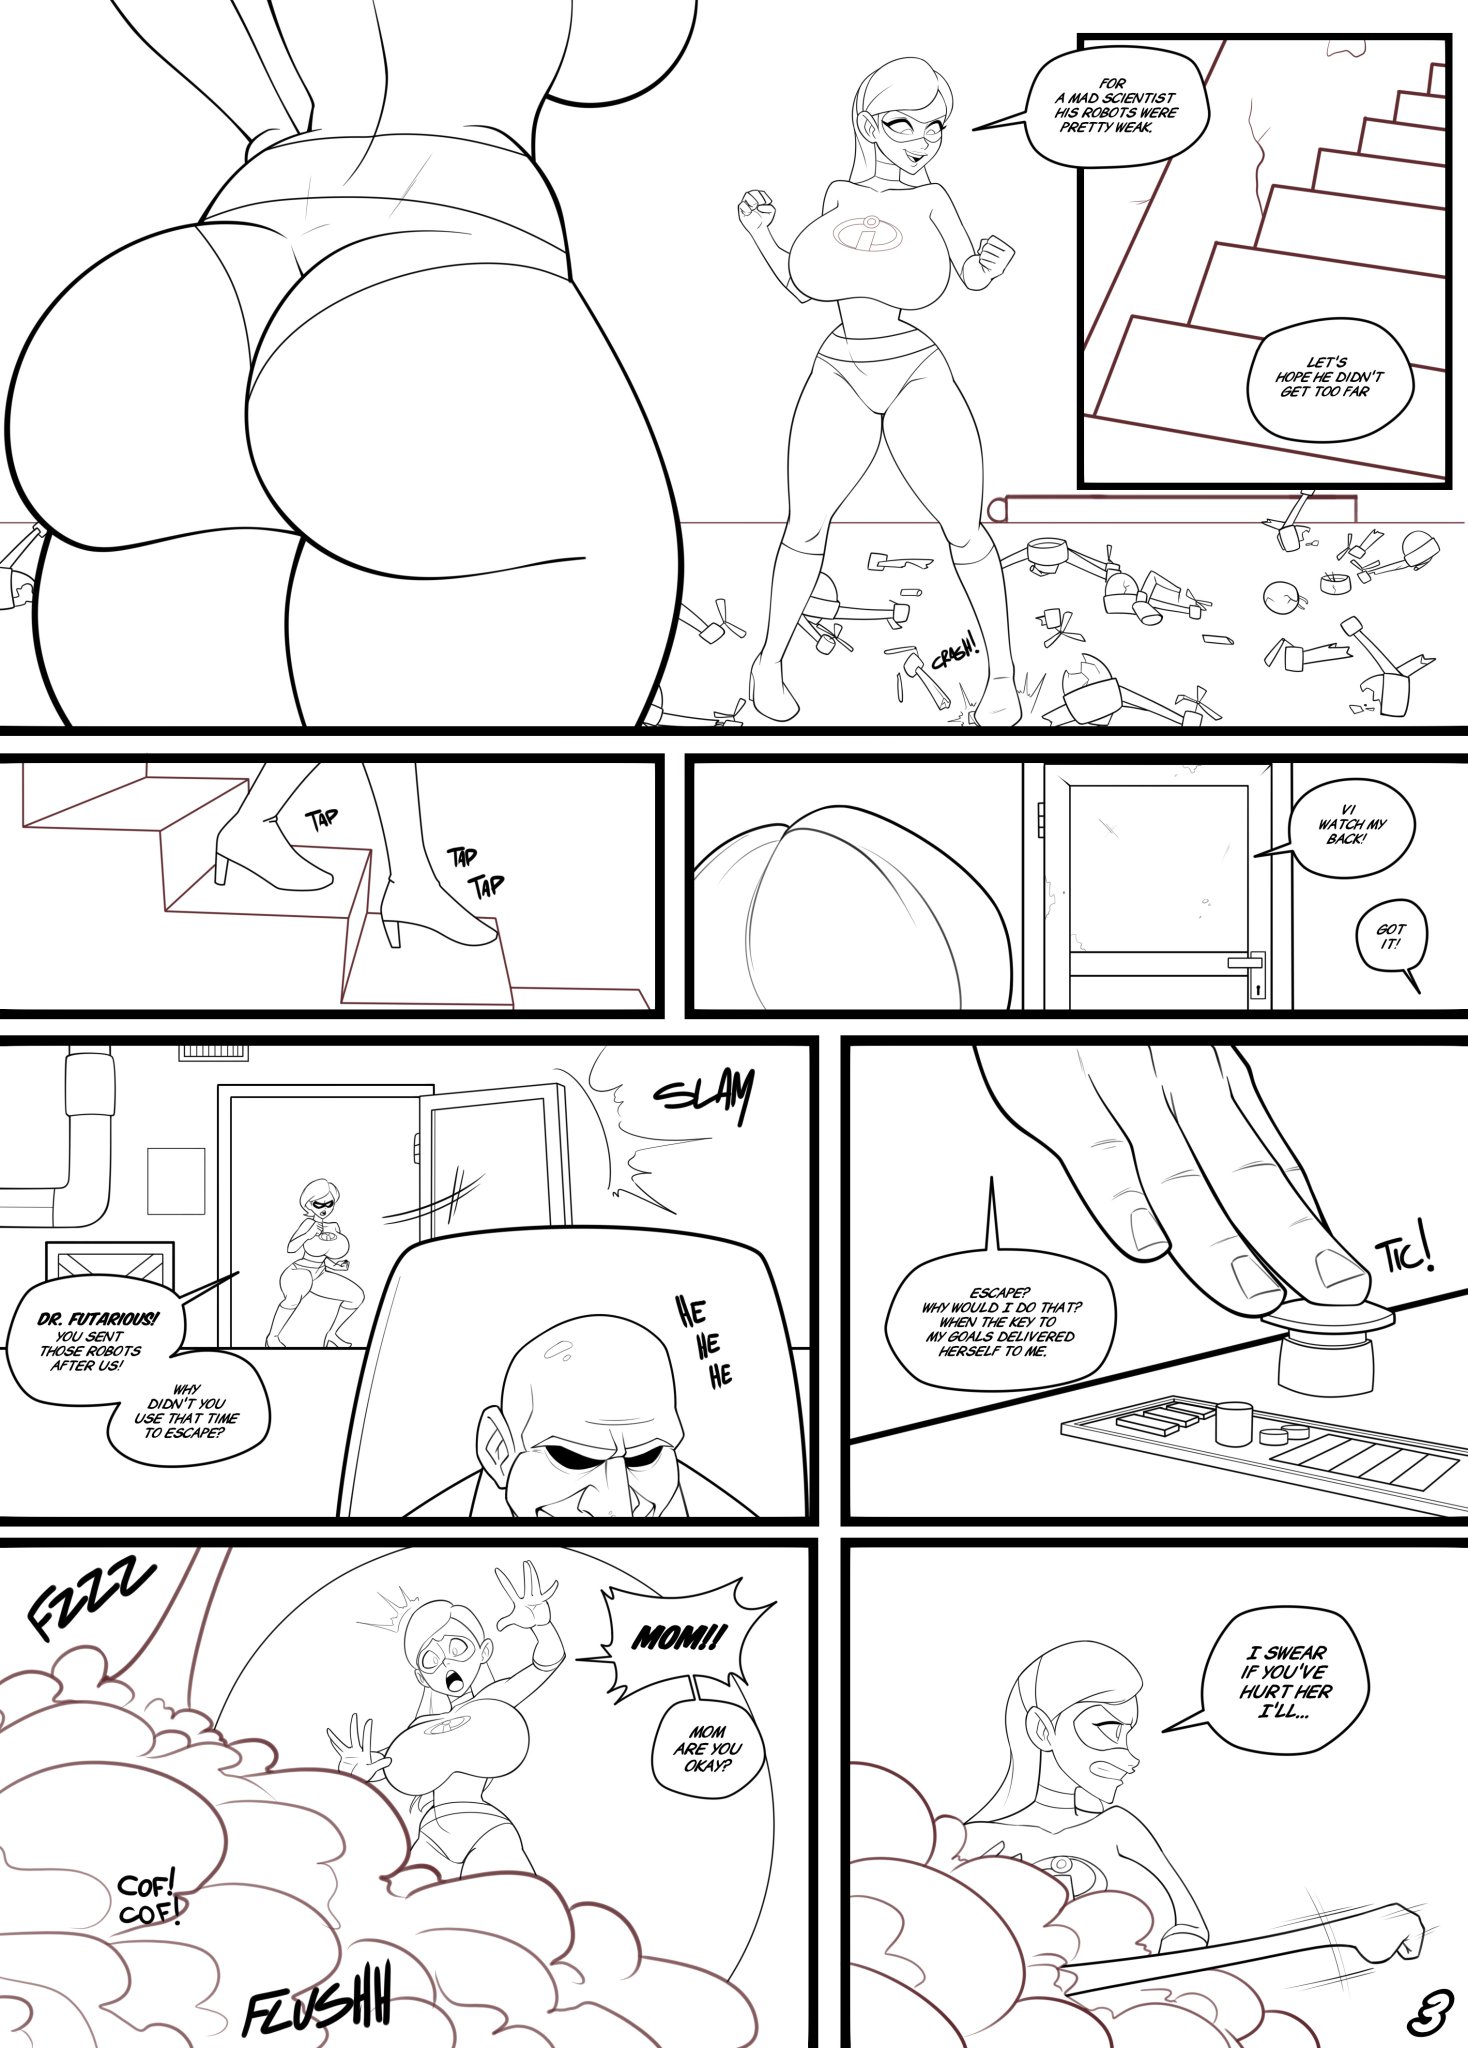 Incestibles: Helen's Stretchy Situation pg 3